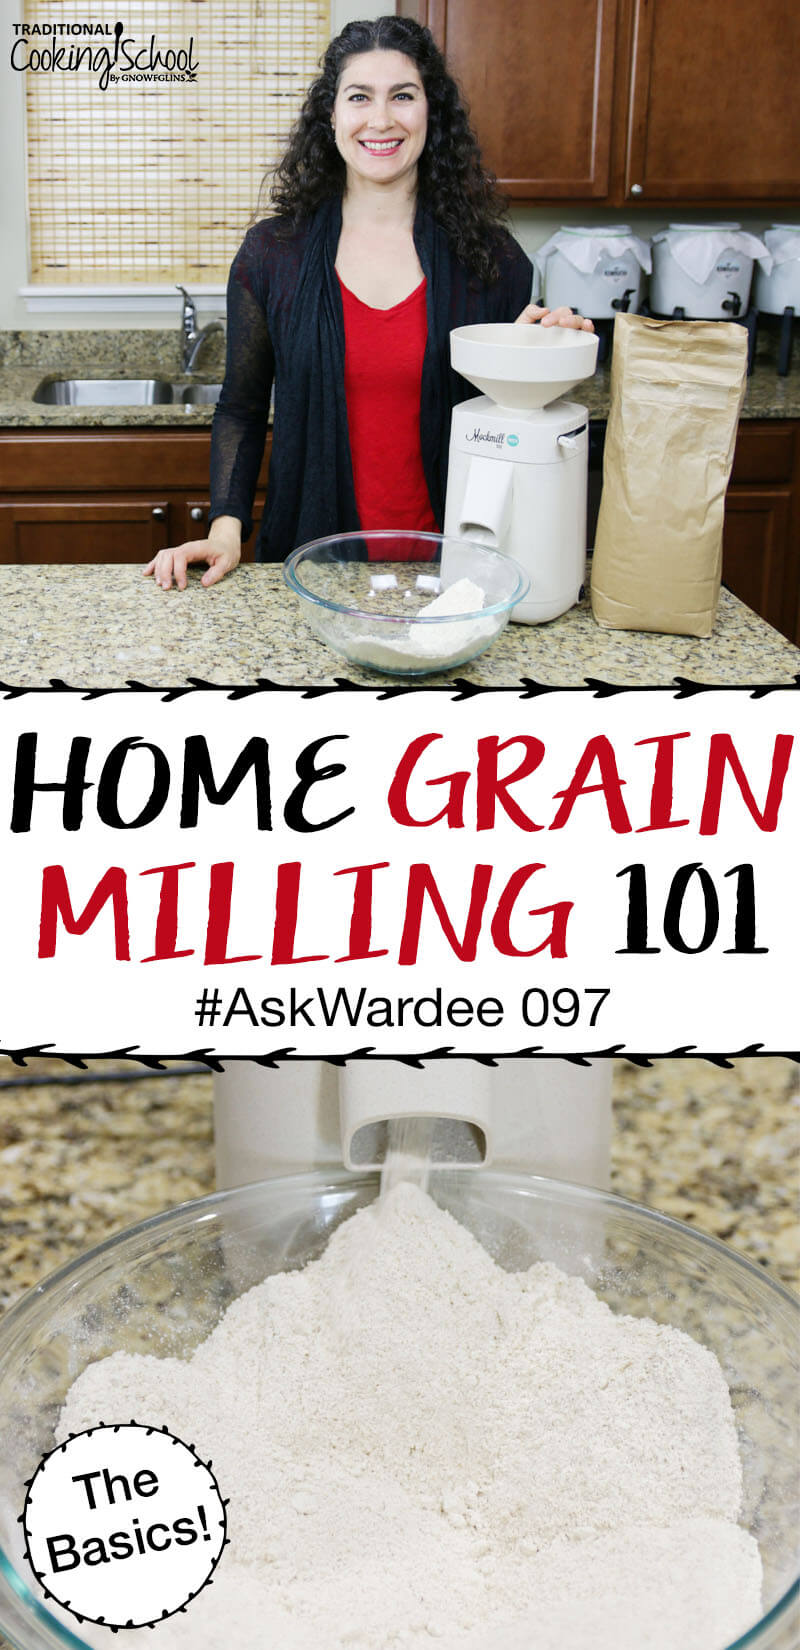 Grain mills, whole grains, milling flour... oh my! You had lots of questions about home grain milling, like... what are the types of grain mills and which one should I buy? What grains should I use and where can I get them? And most importantly, why would I want to mill my own flour anyway?! Watch, listen, or read for my answers on the basics of home grain milling!